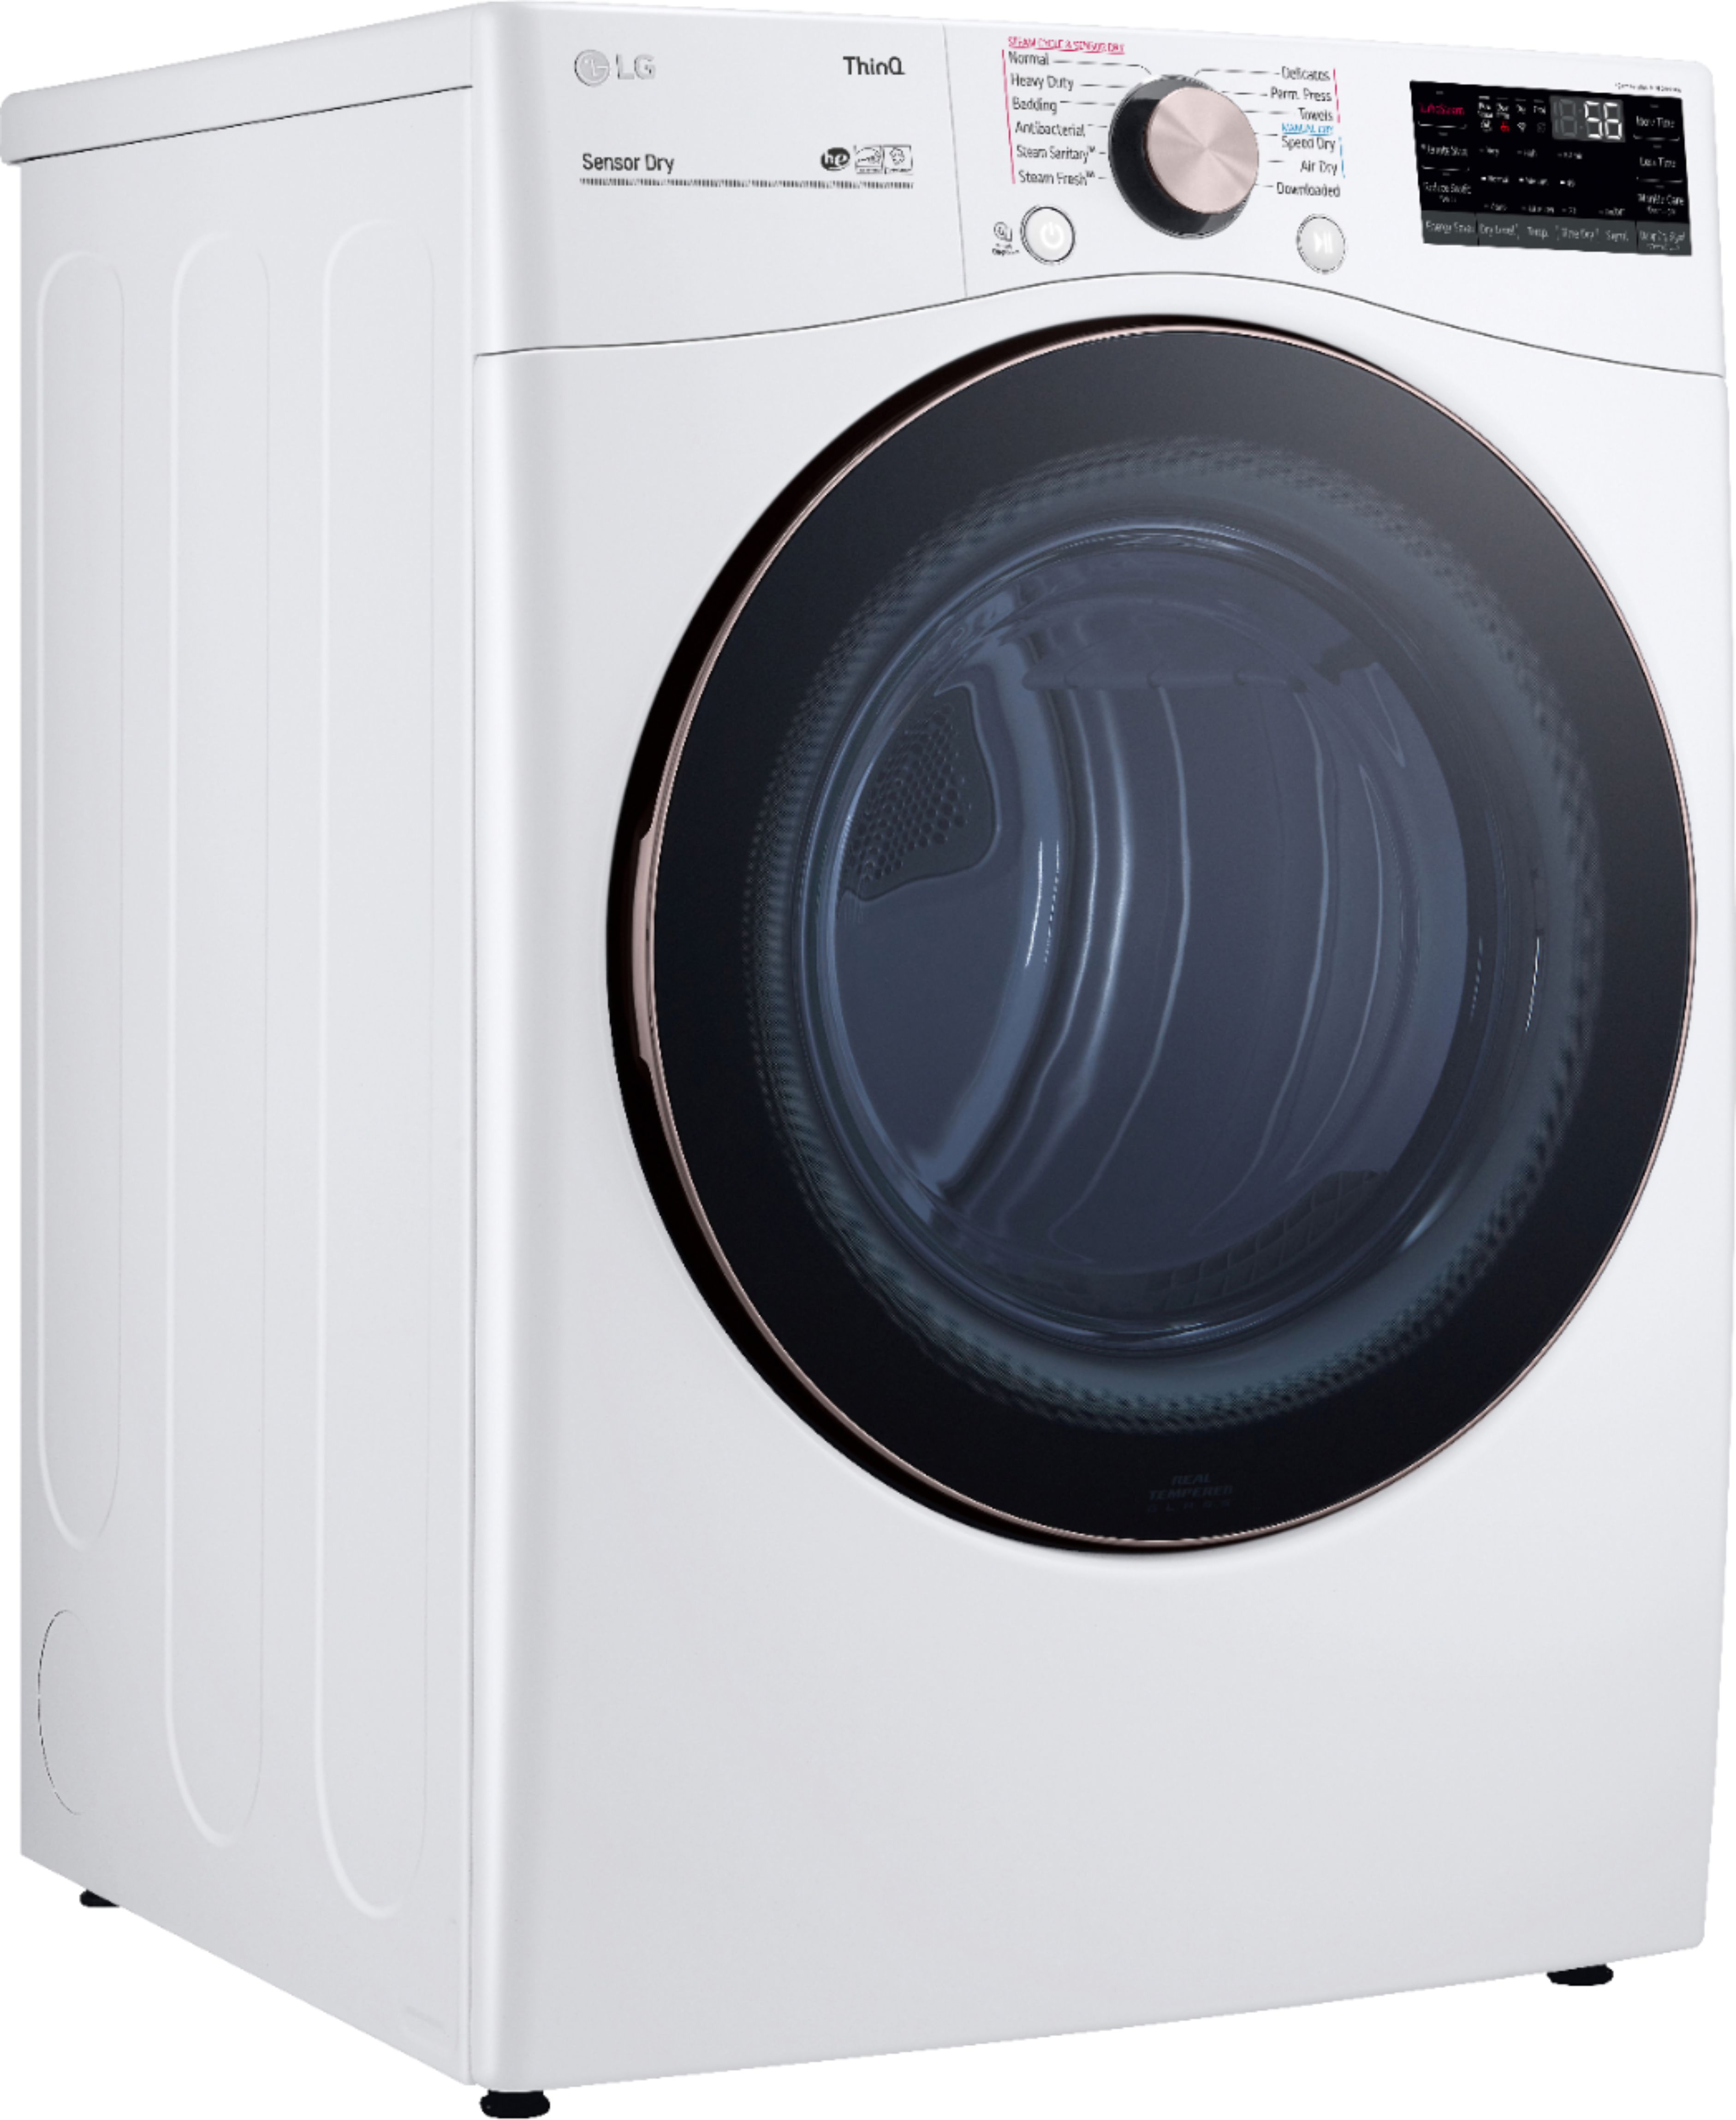 Angle View: Samsung - 7.4 Cu. Ft. Gas Dryer with Sensor Dry - White